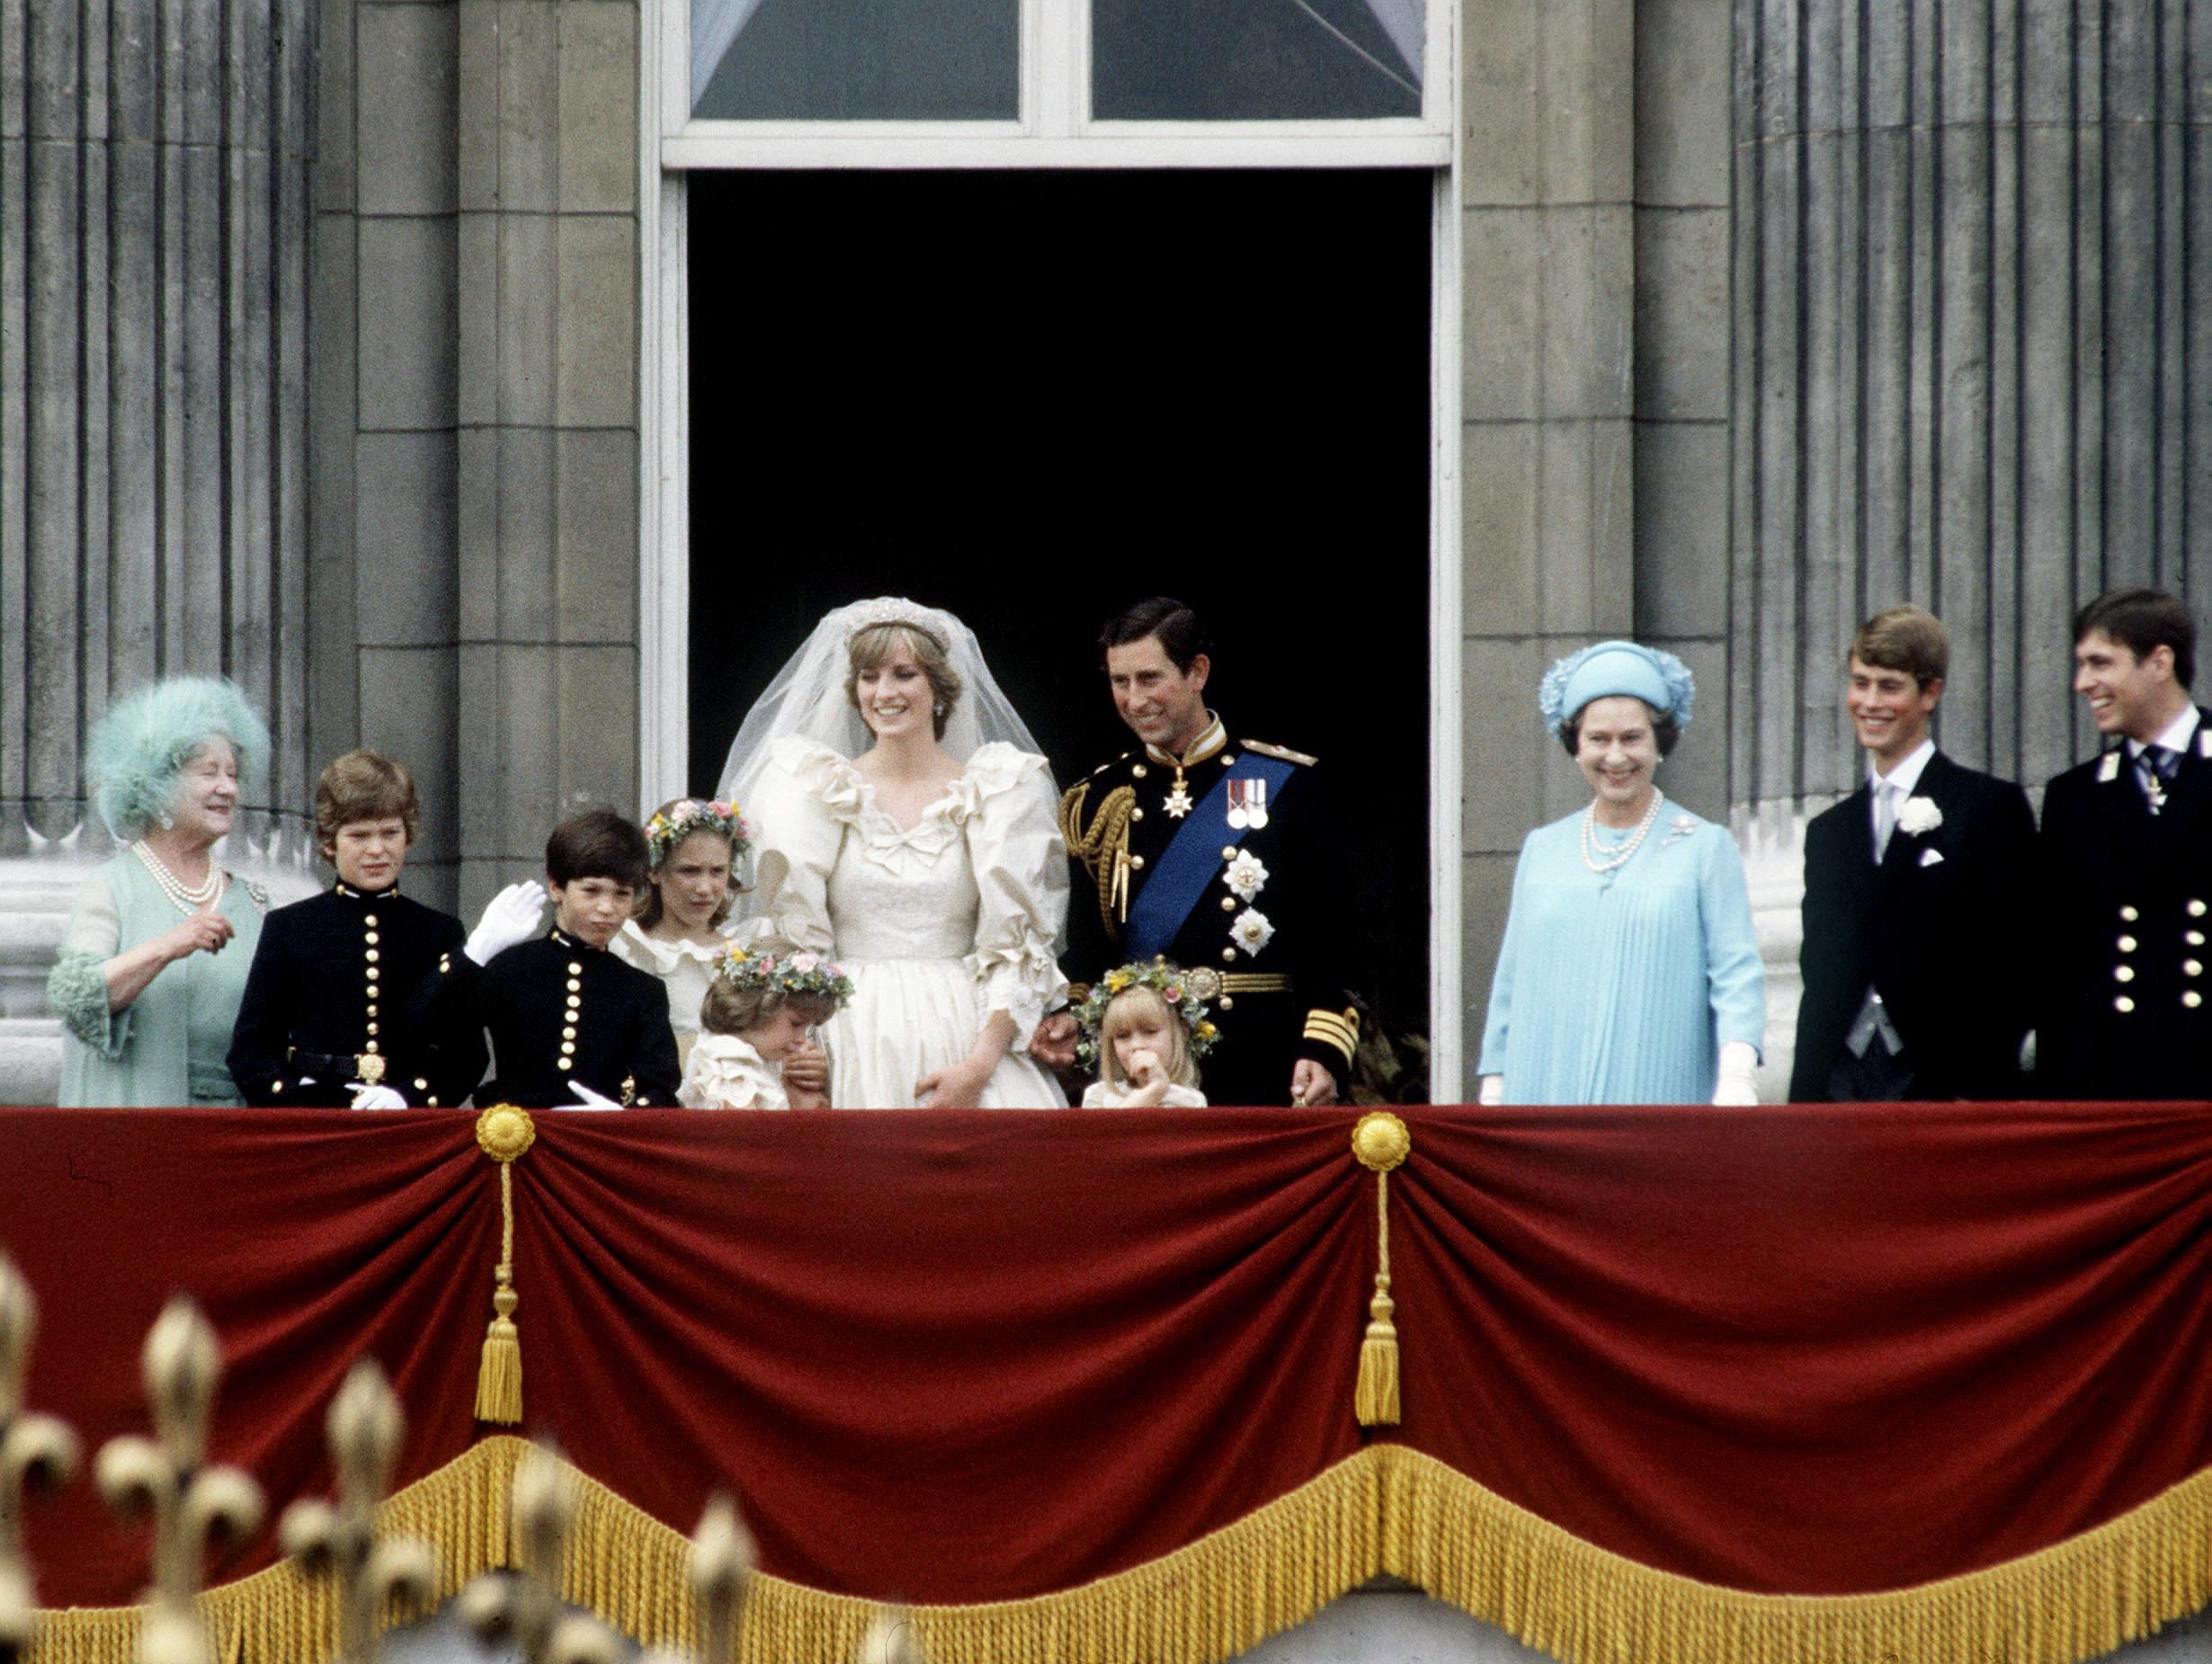 Prince Charles And Princess Diana With Their Bridesmaids And Pageboys, The Queen Mother, The Queen, Prince Edward And Prince Andrew On The Balcony Of Buckingham Palace On Their Wedding Day In London on 29th July 1981 | Source: Getty Images